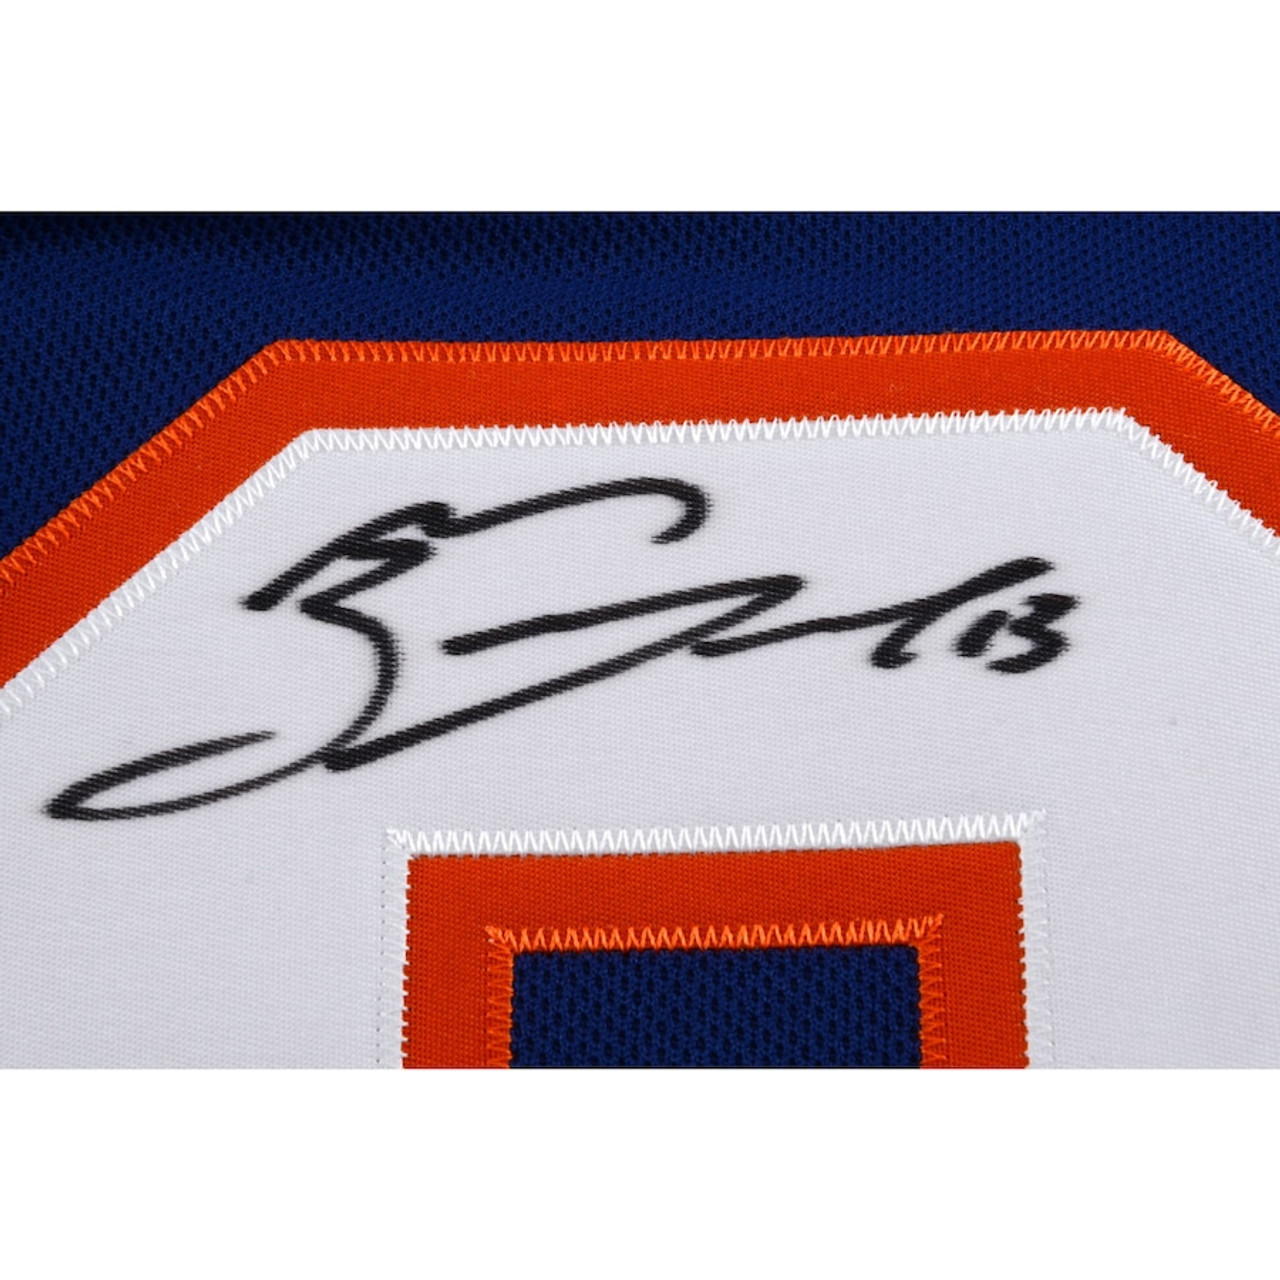 Mathew Barzal New York Islanders Autographed Blue Adidas Authentic Jersey -  Autographed NHL Jerseys at 's Sports Collectibles Store